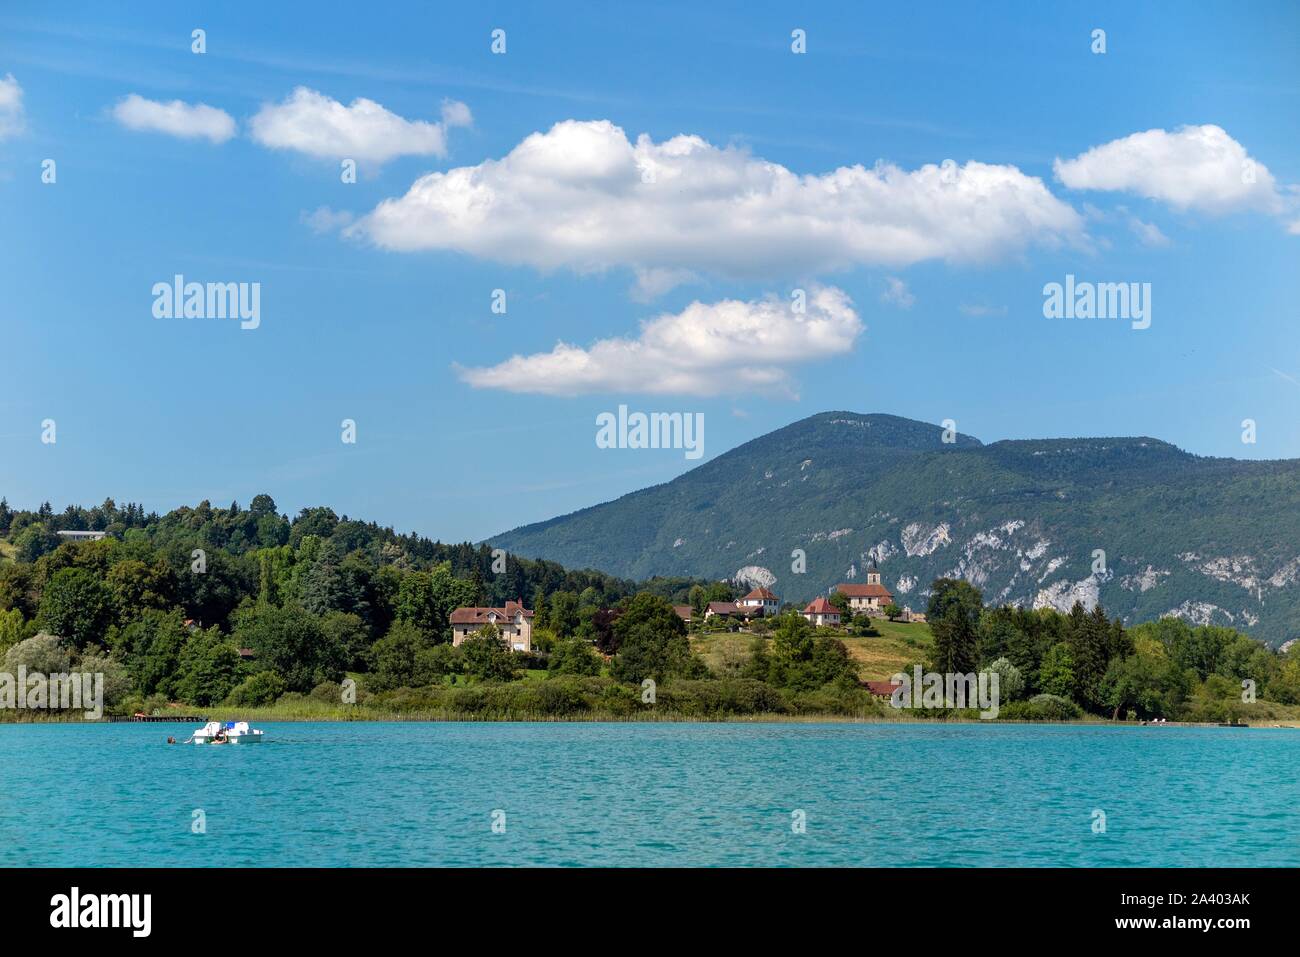 CHURCH AND VILLAGE OF SAINT-ALBAN-DE MONTBEL, AIGUEBELETTE LAKE, SAVOY (73), FRANCE Stock Photo